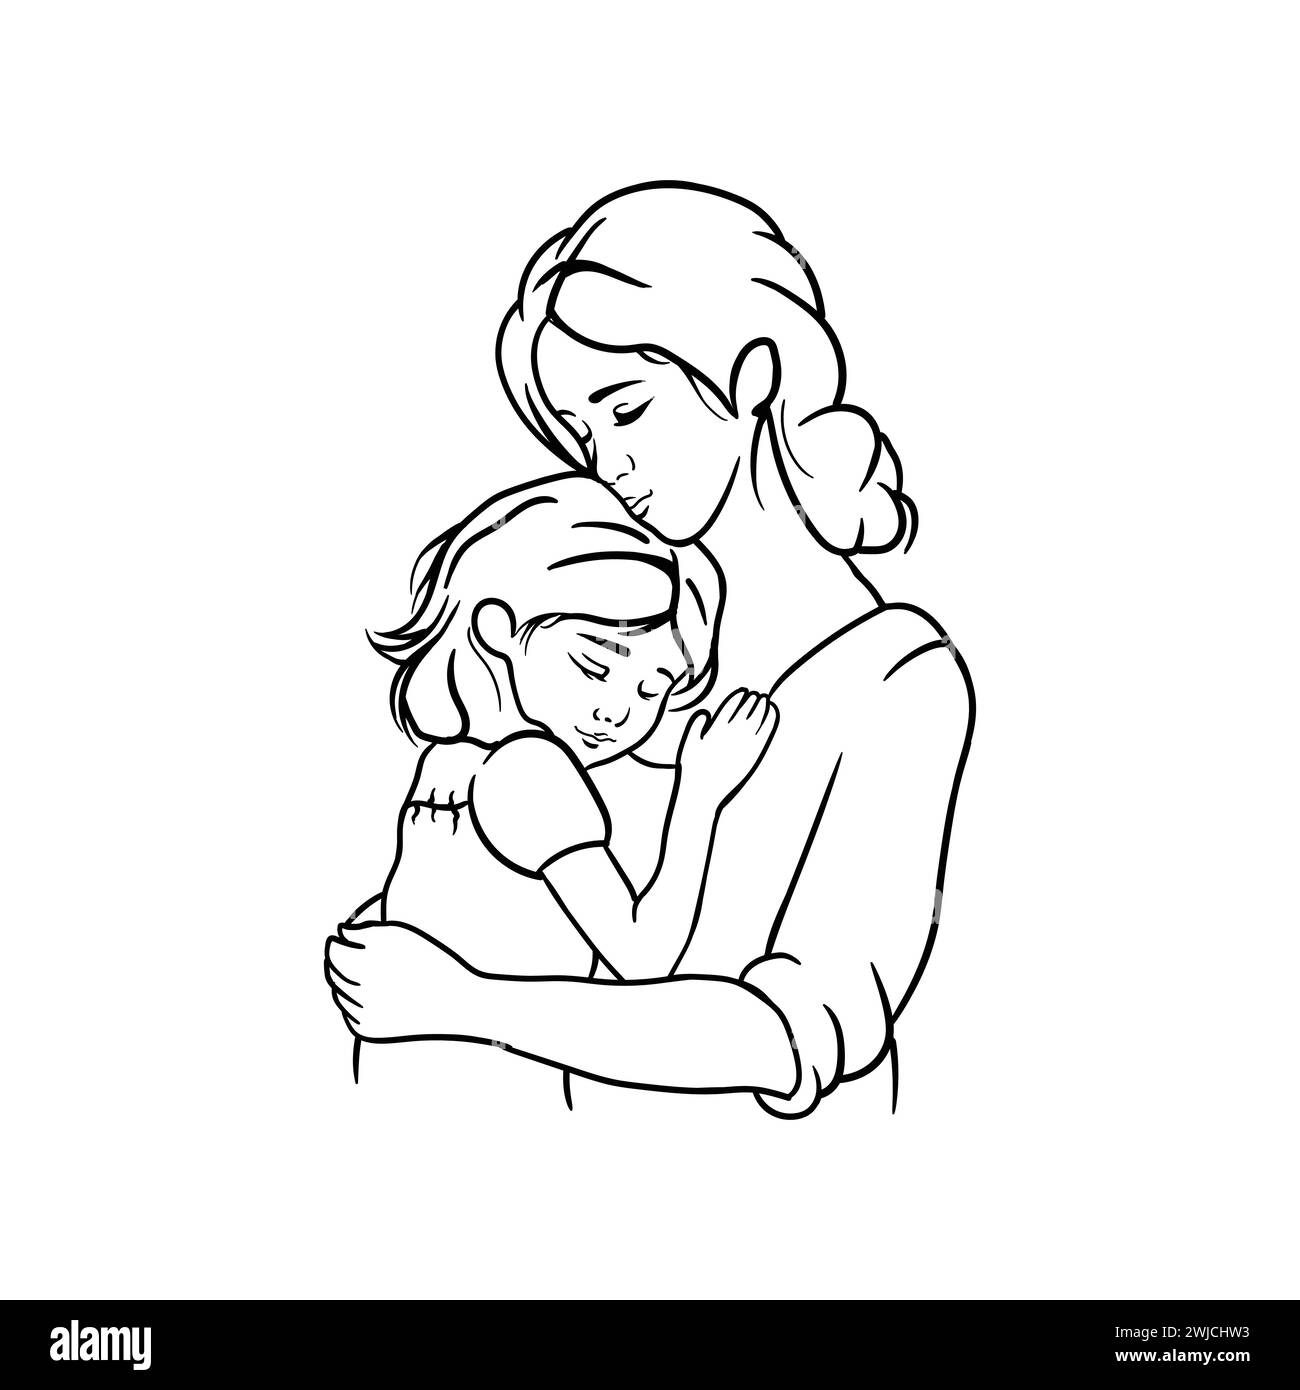 Mom hugs little daughter holding in her arms Vector Image